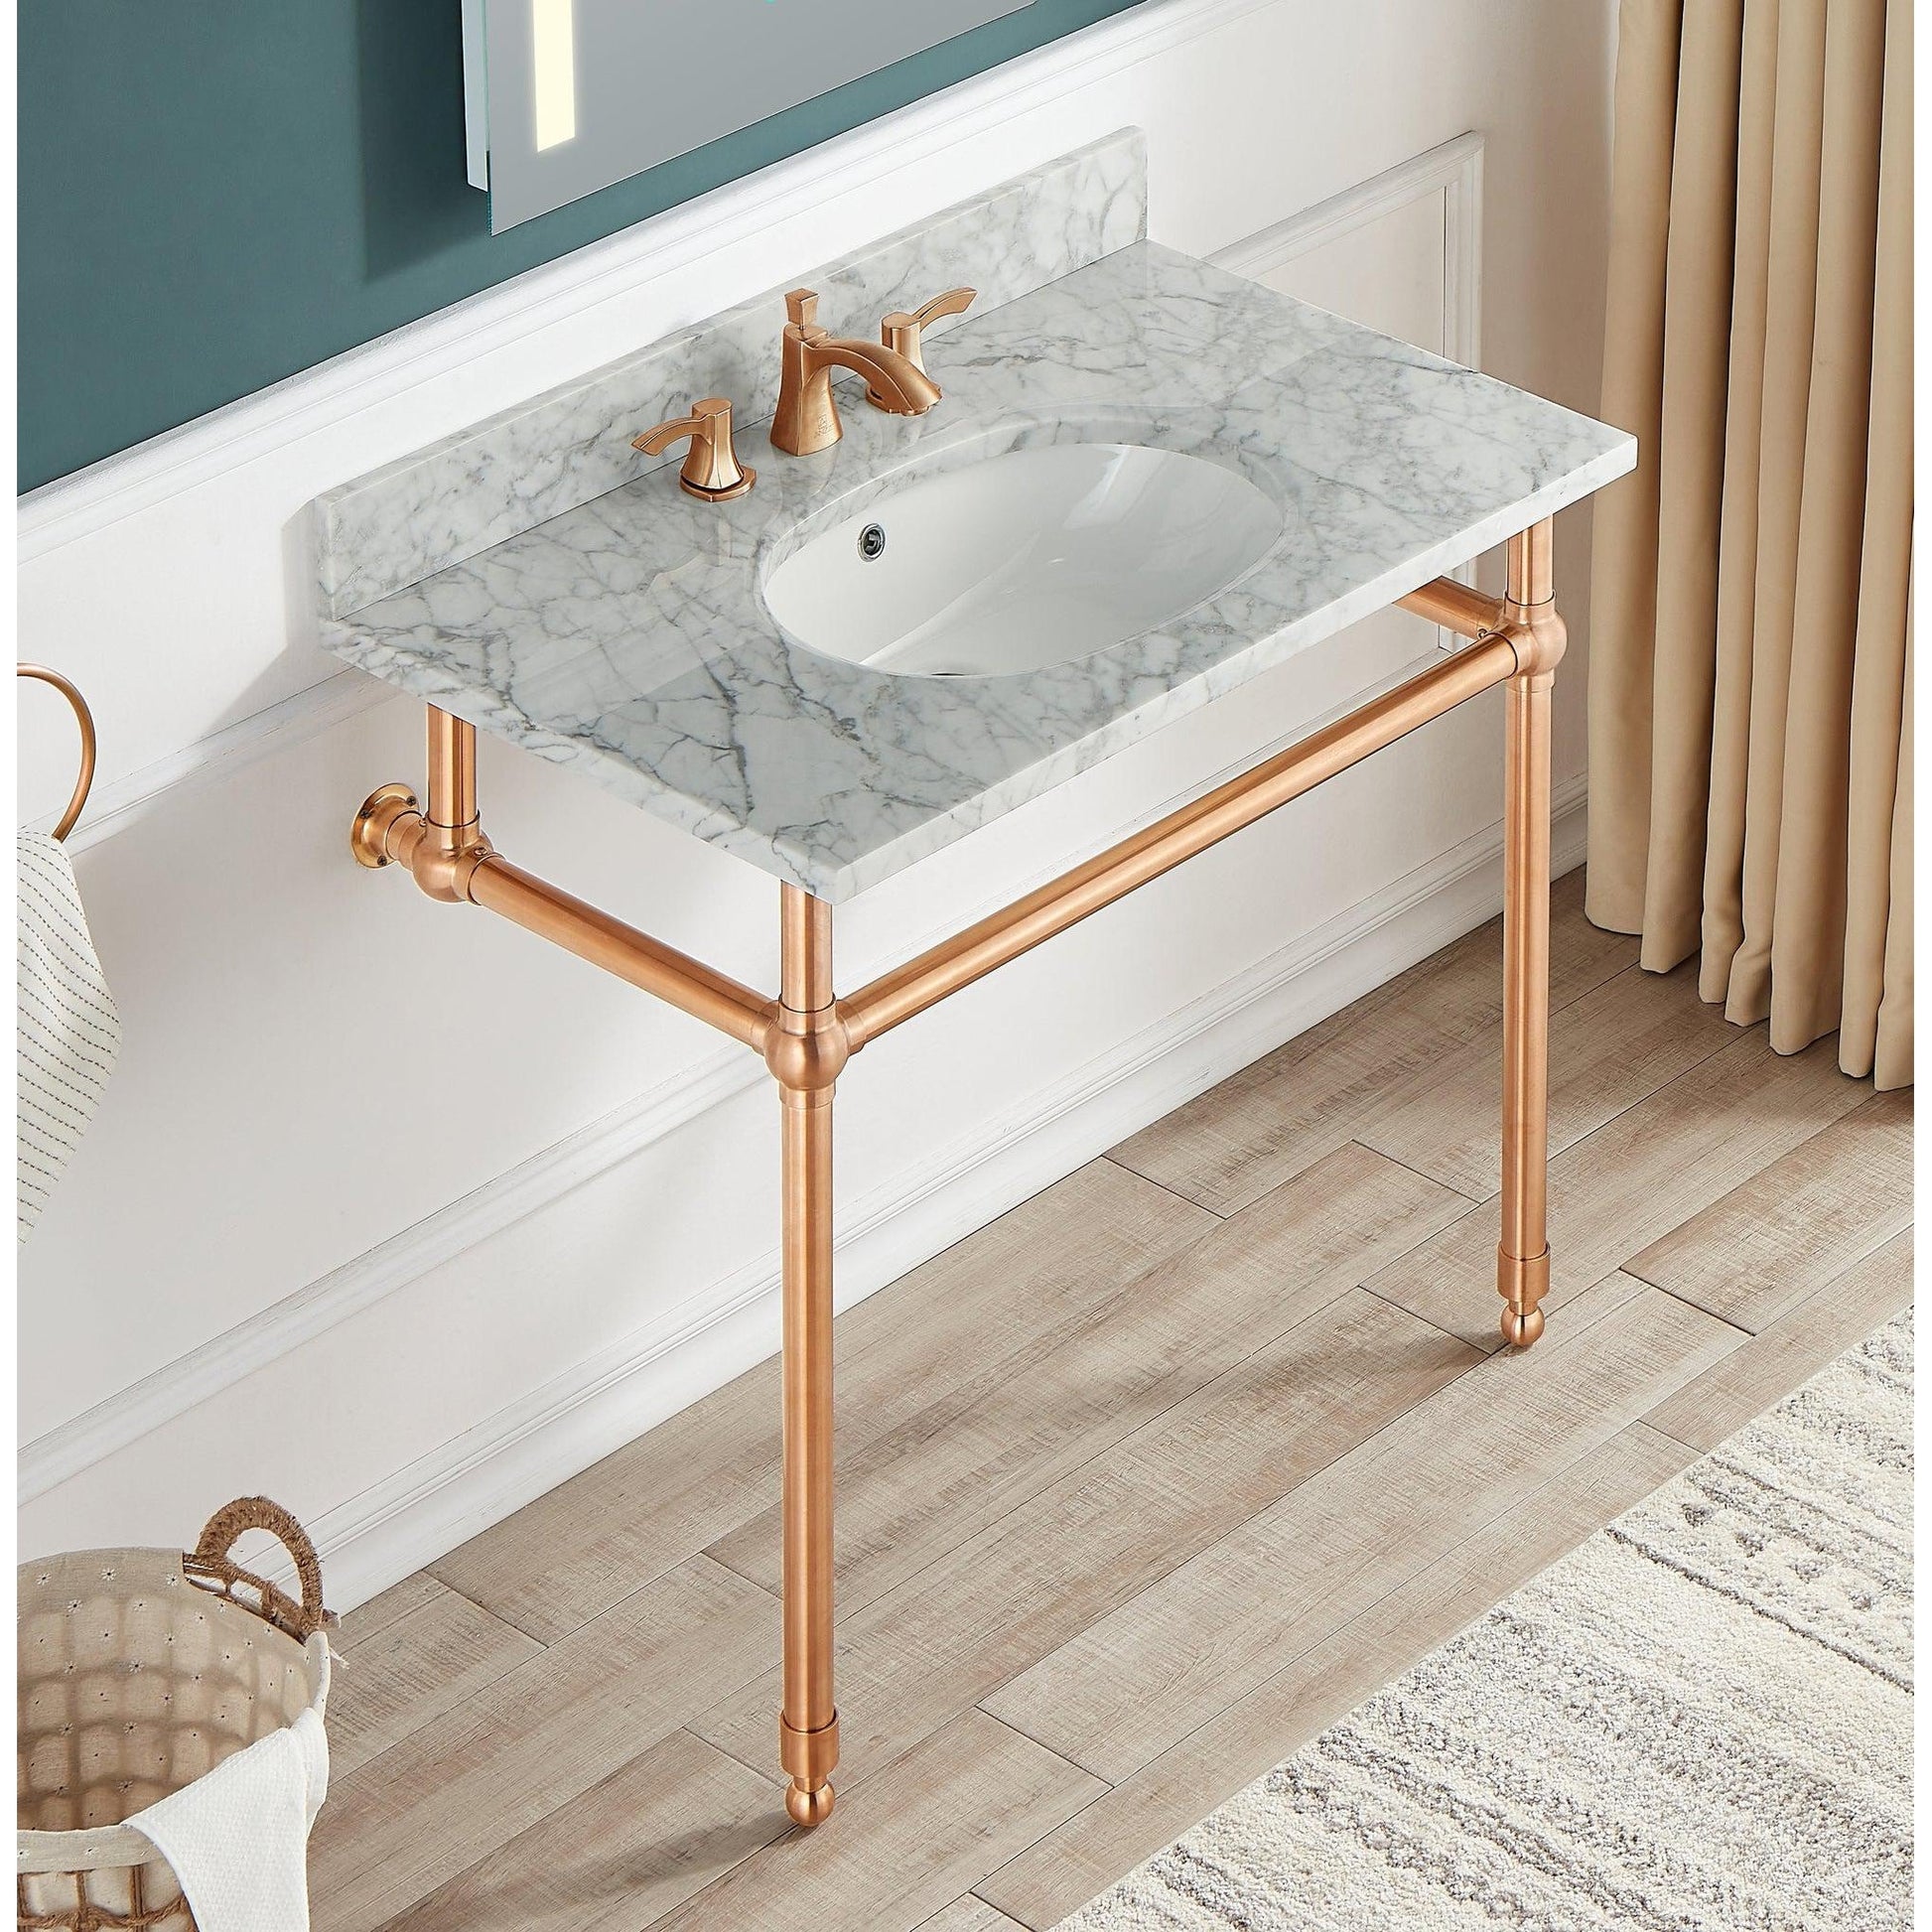 ANZZI Verona Series 34.5" x 34" Console Sink in White Carrara Countertop With Rose Gold Stainless Steel Stand Legs